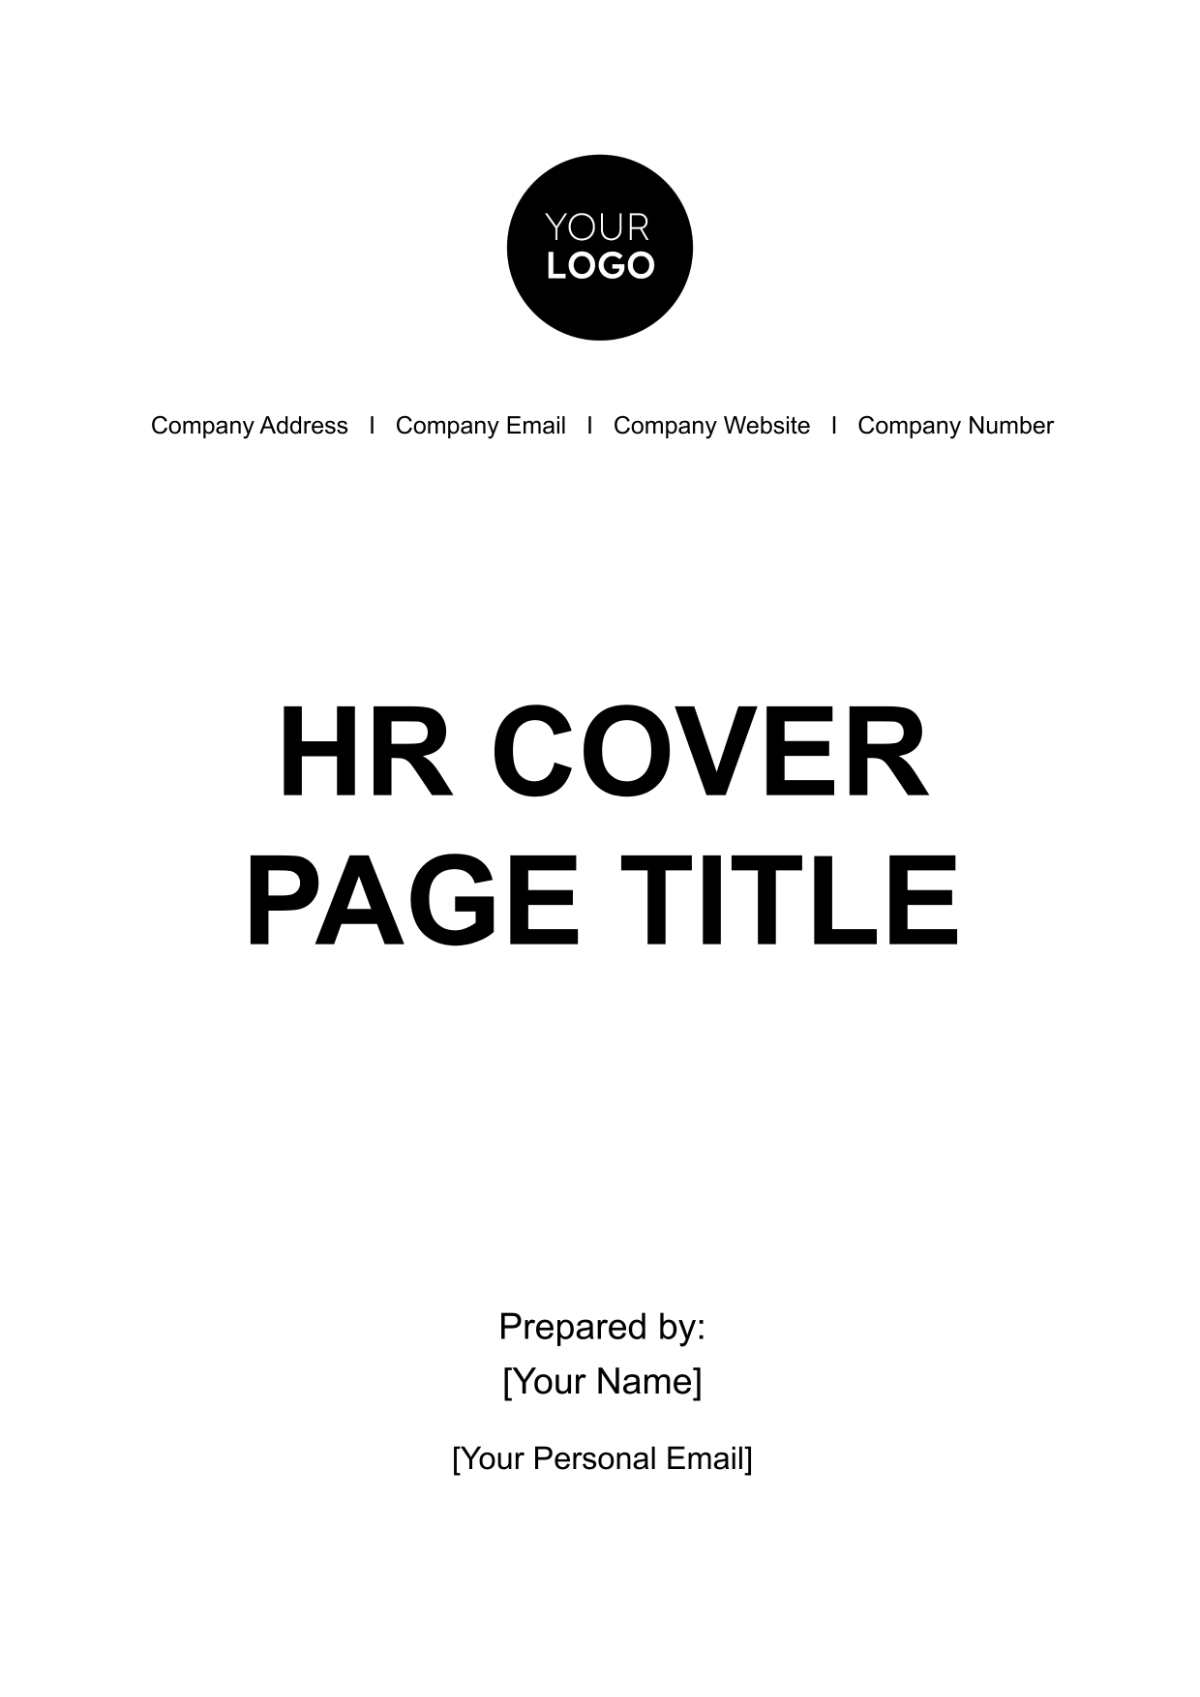 HR Cover Page Template